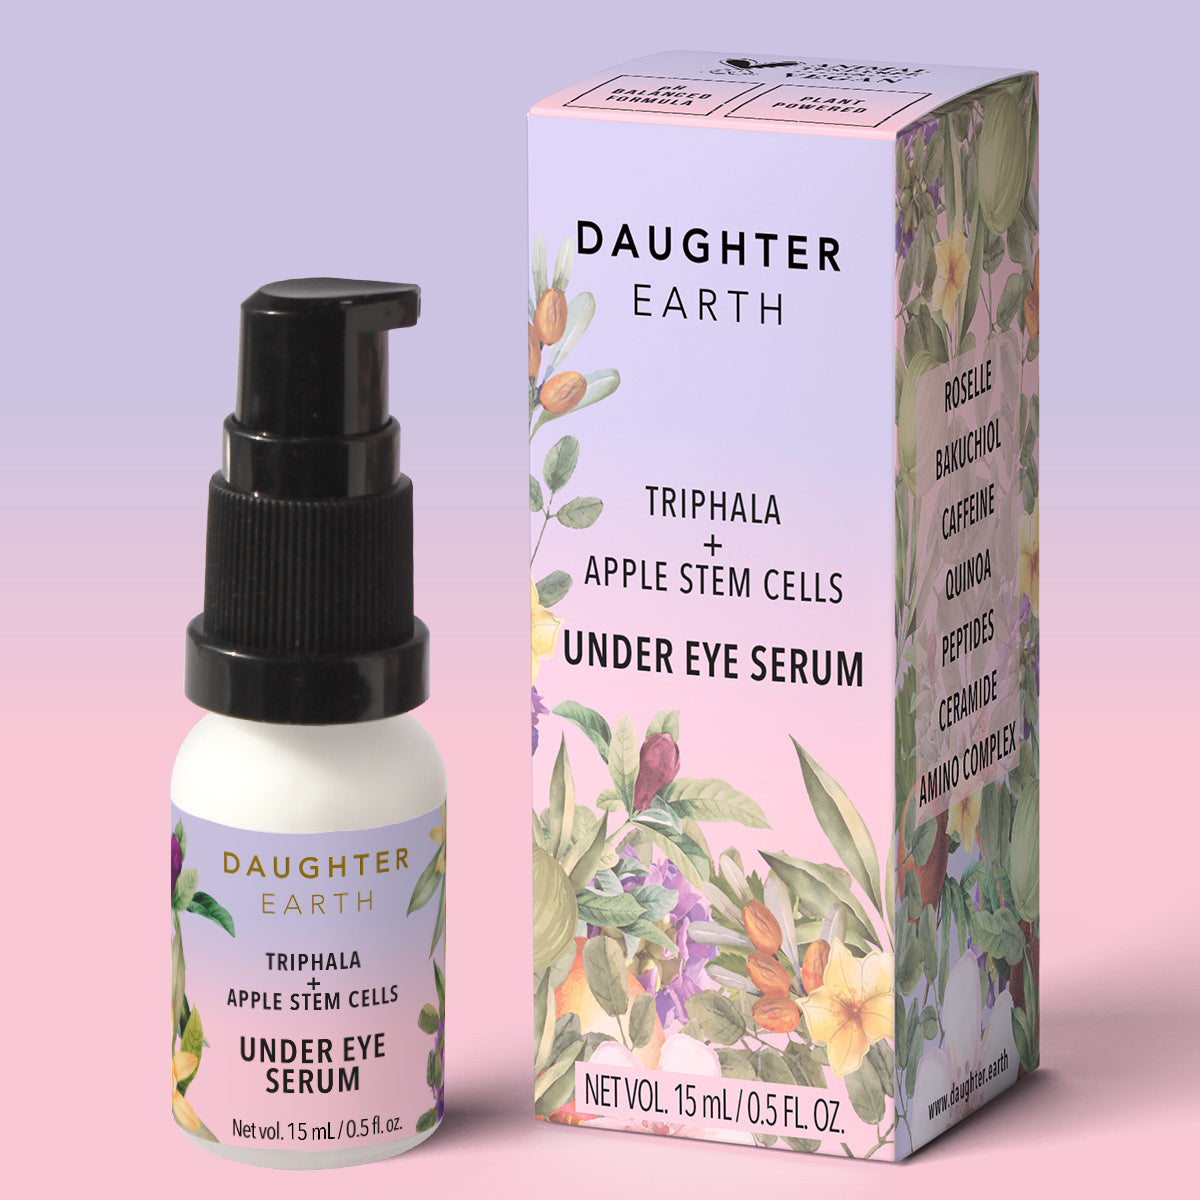 Walnut Oil Cold Pressed Wild-Harvested Daughter Earth